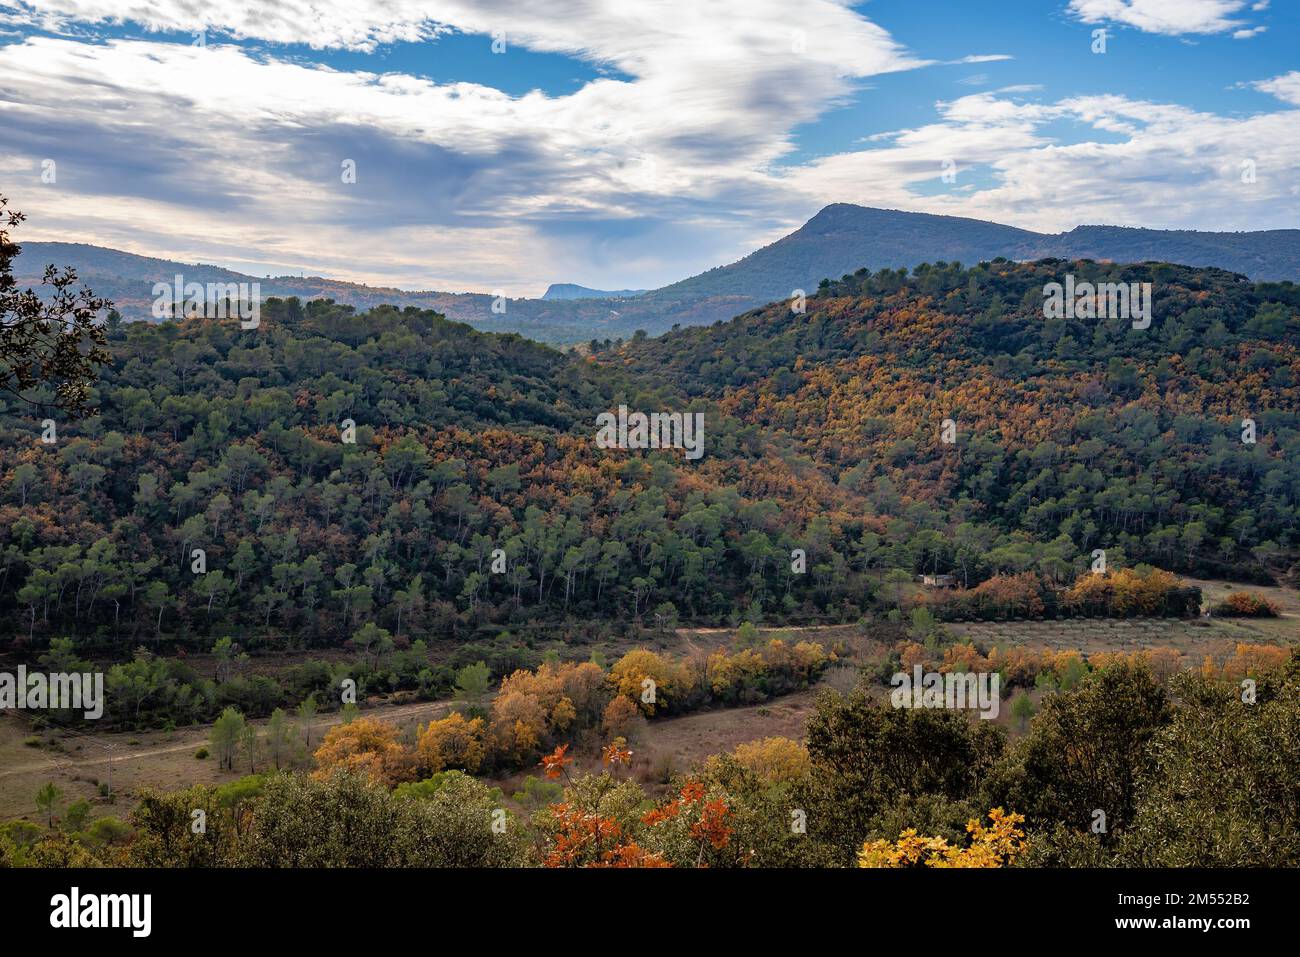 View of the mountains and hills in the Var department in France, in late fall. The leaves of the trees are turning yellow and red Stock Photo